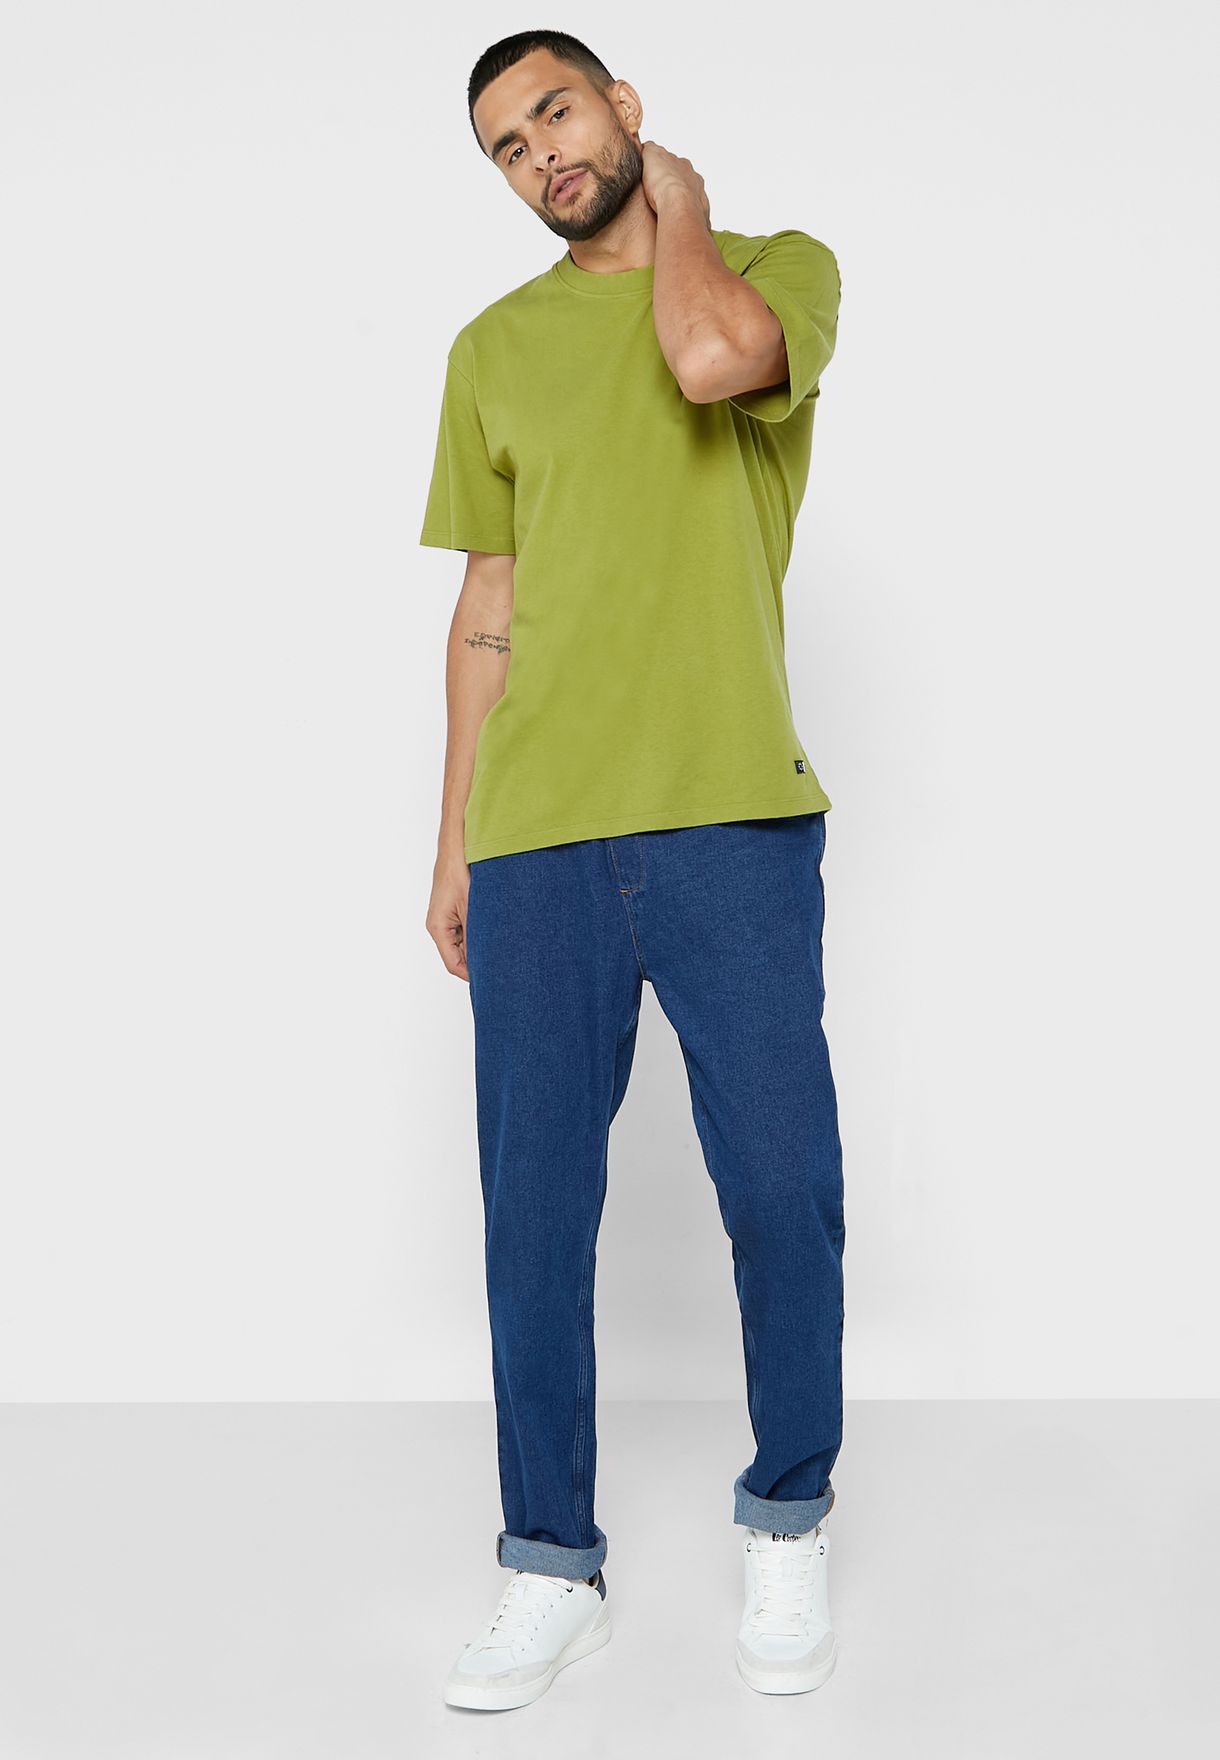 Relaxed Fit 5 Pocket Jean